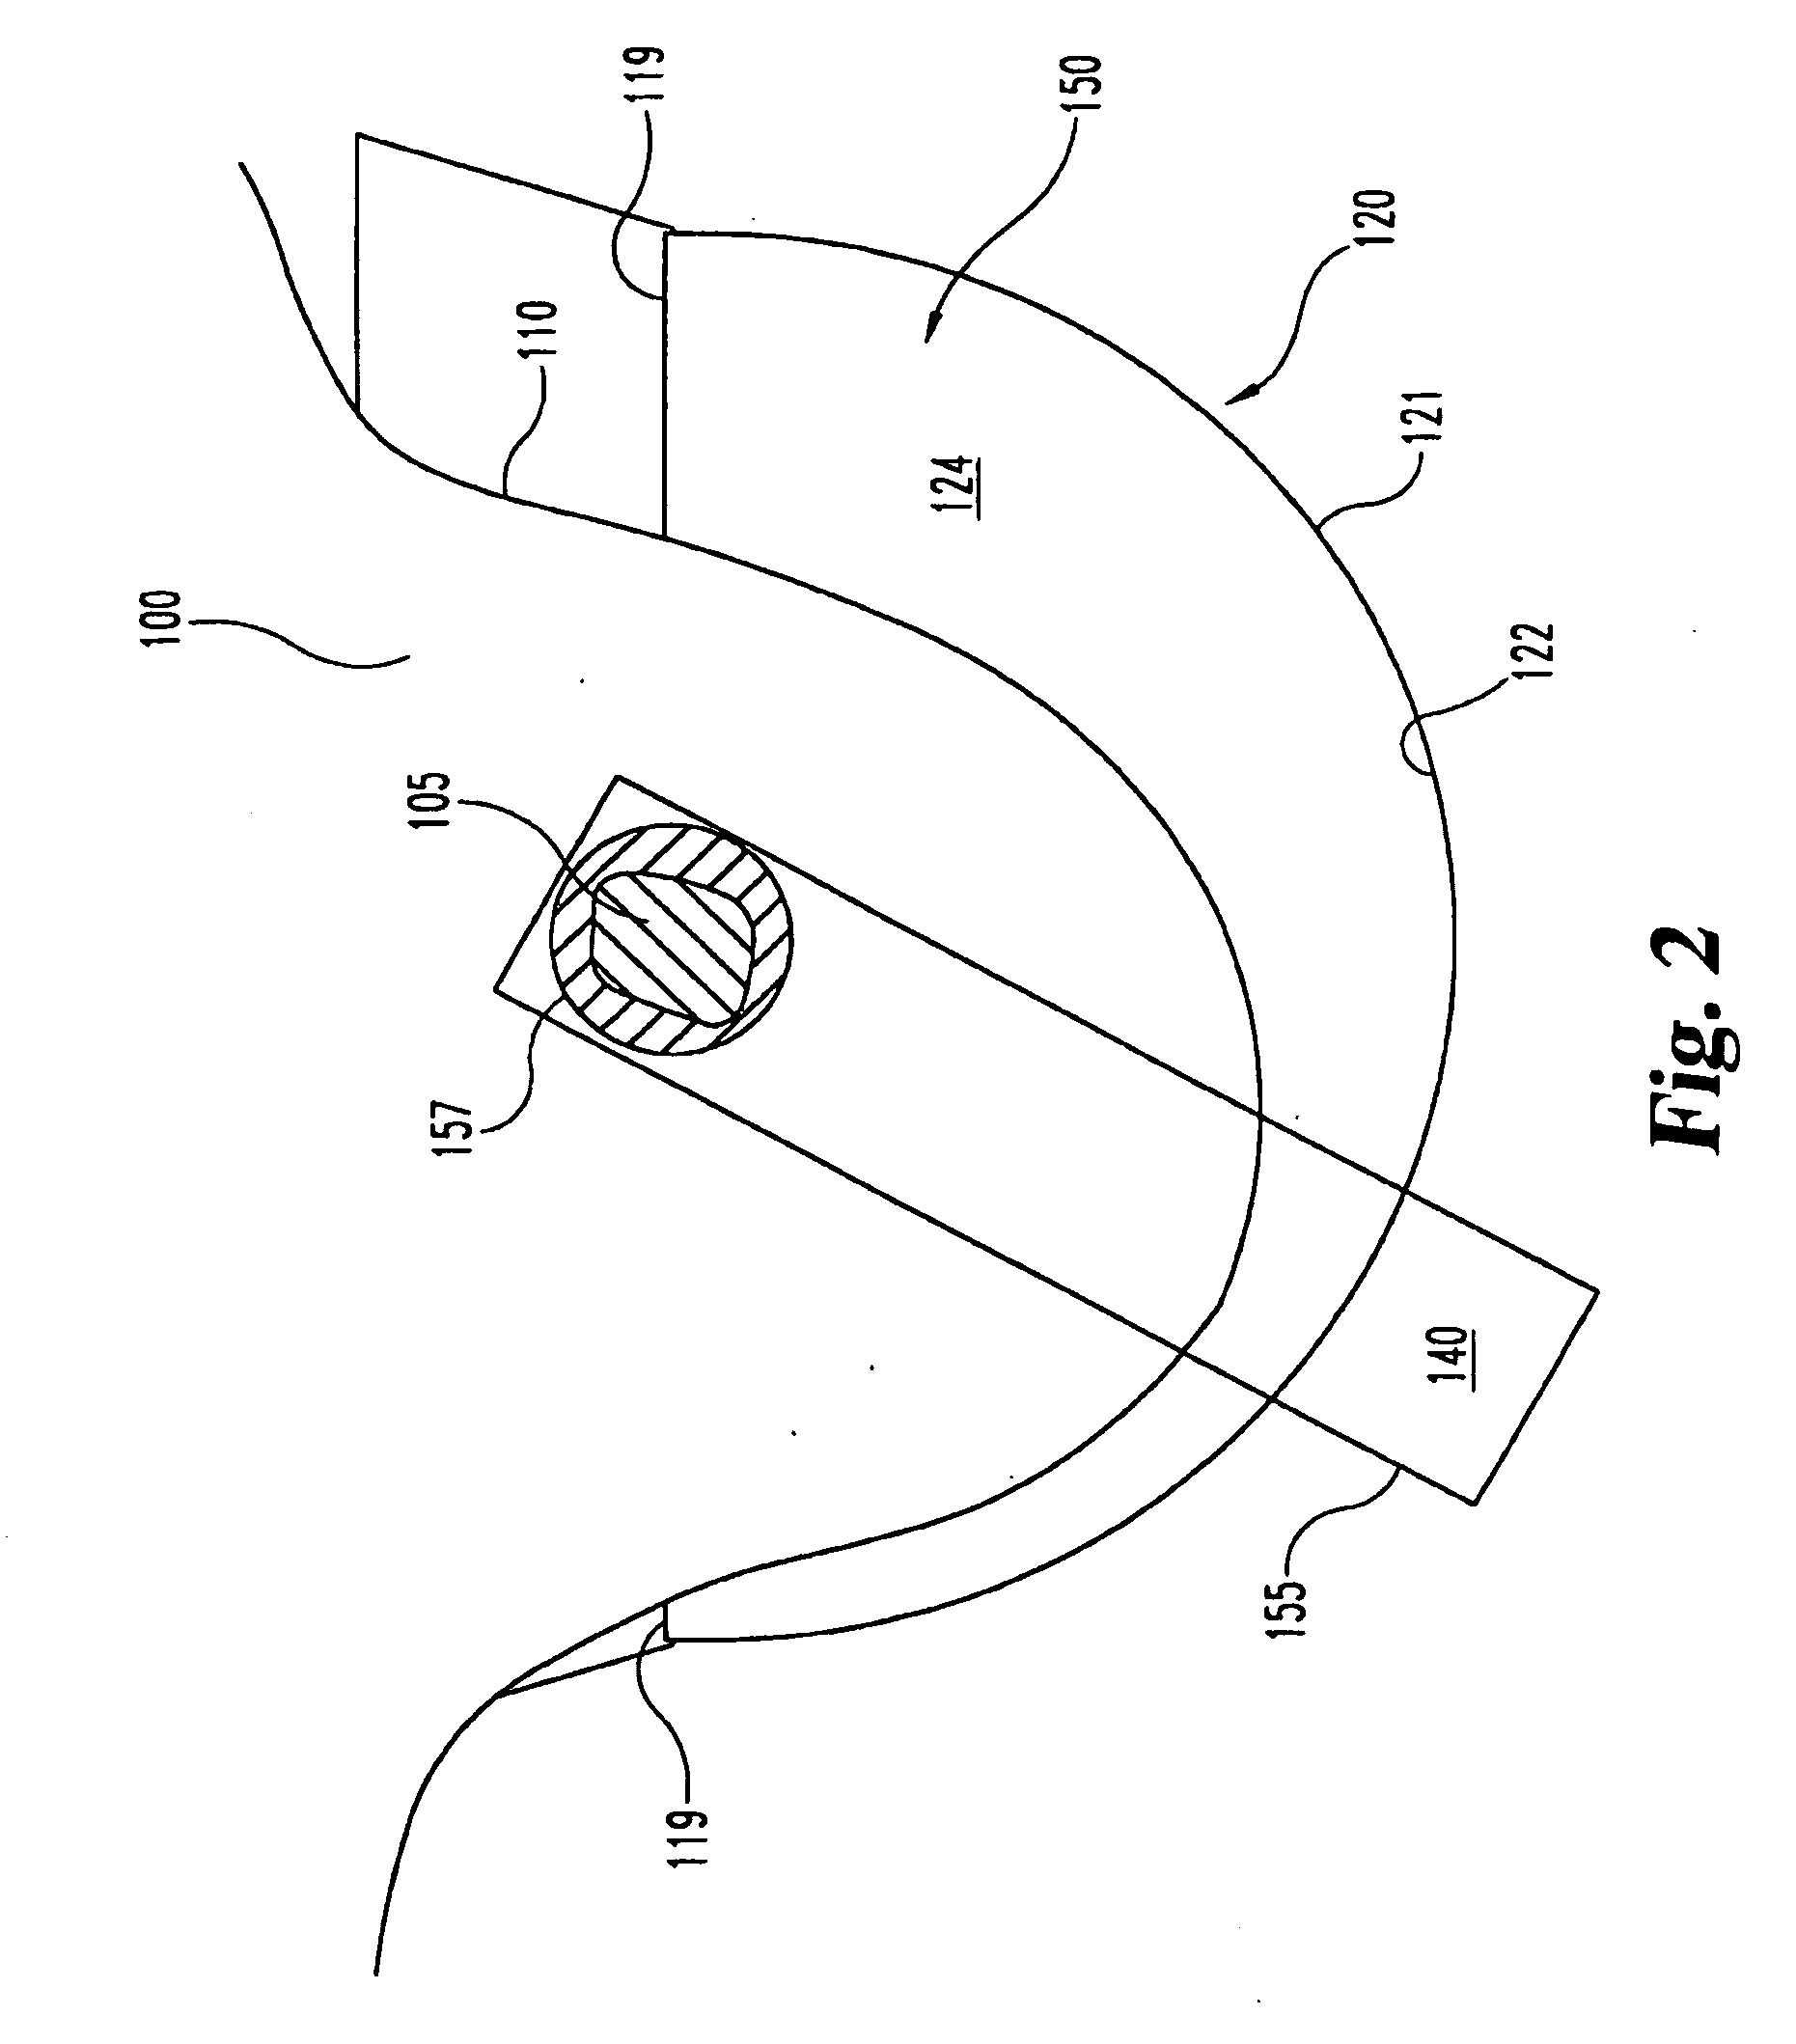 Apparatus and method for the treatment of breast cancer with particle beams